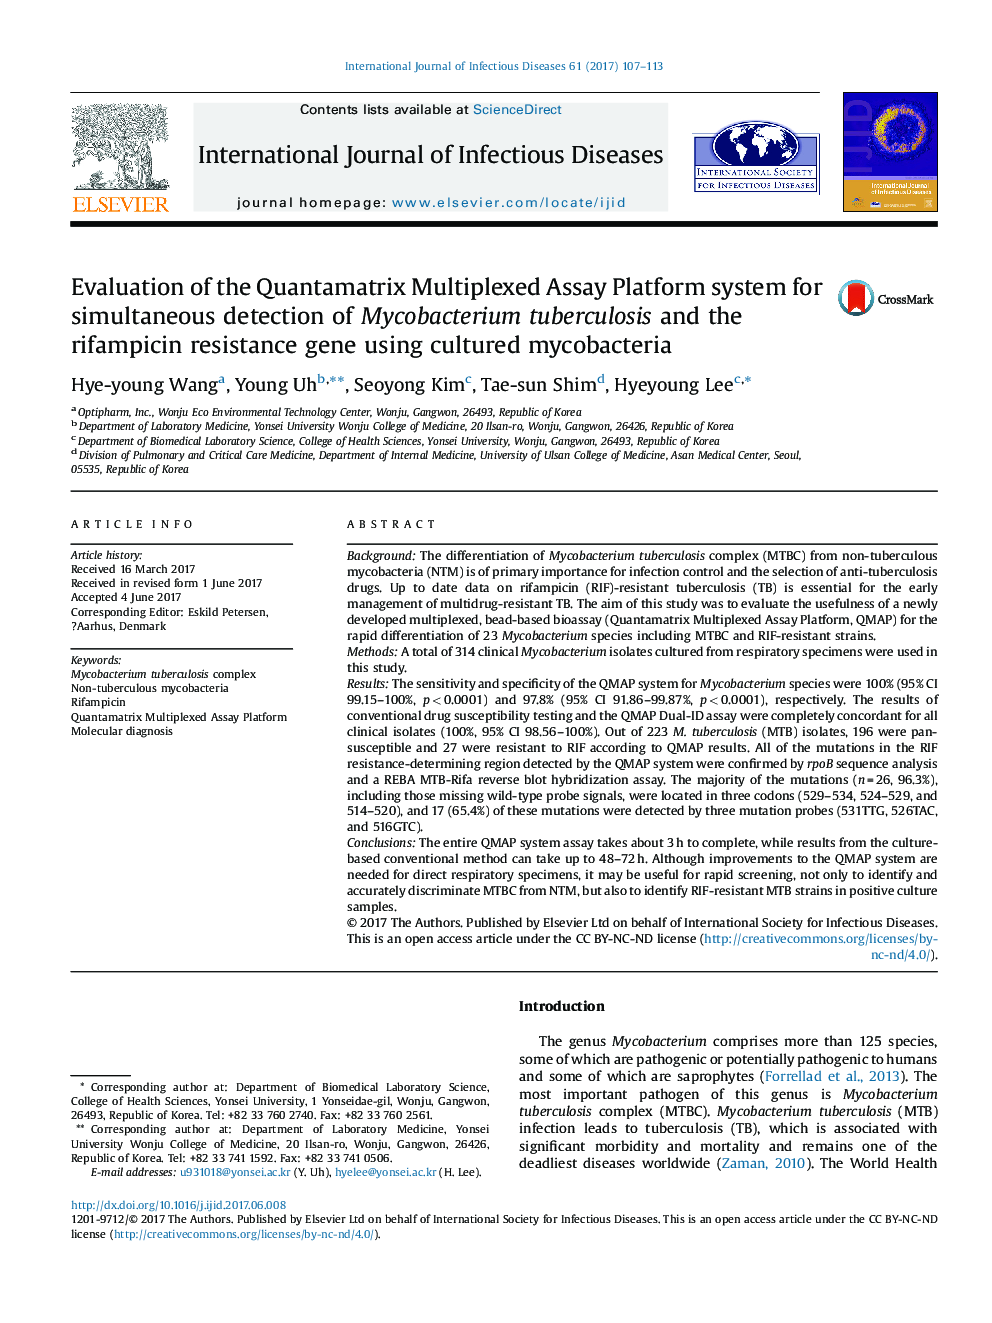 Evaluation of the Quantamatrix Multiplexed Assay Platform system for simultaneous detection of Mycobacterium tuberculosis and the rifampicin resistance gene using cultured mycobacteria